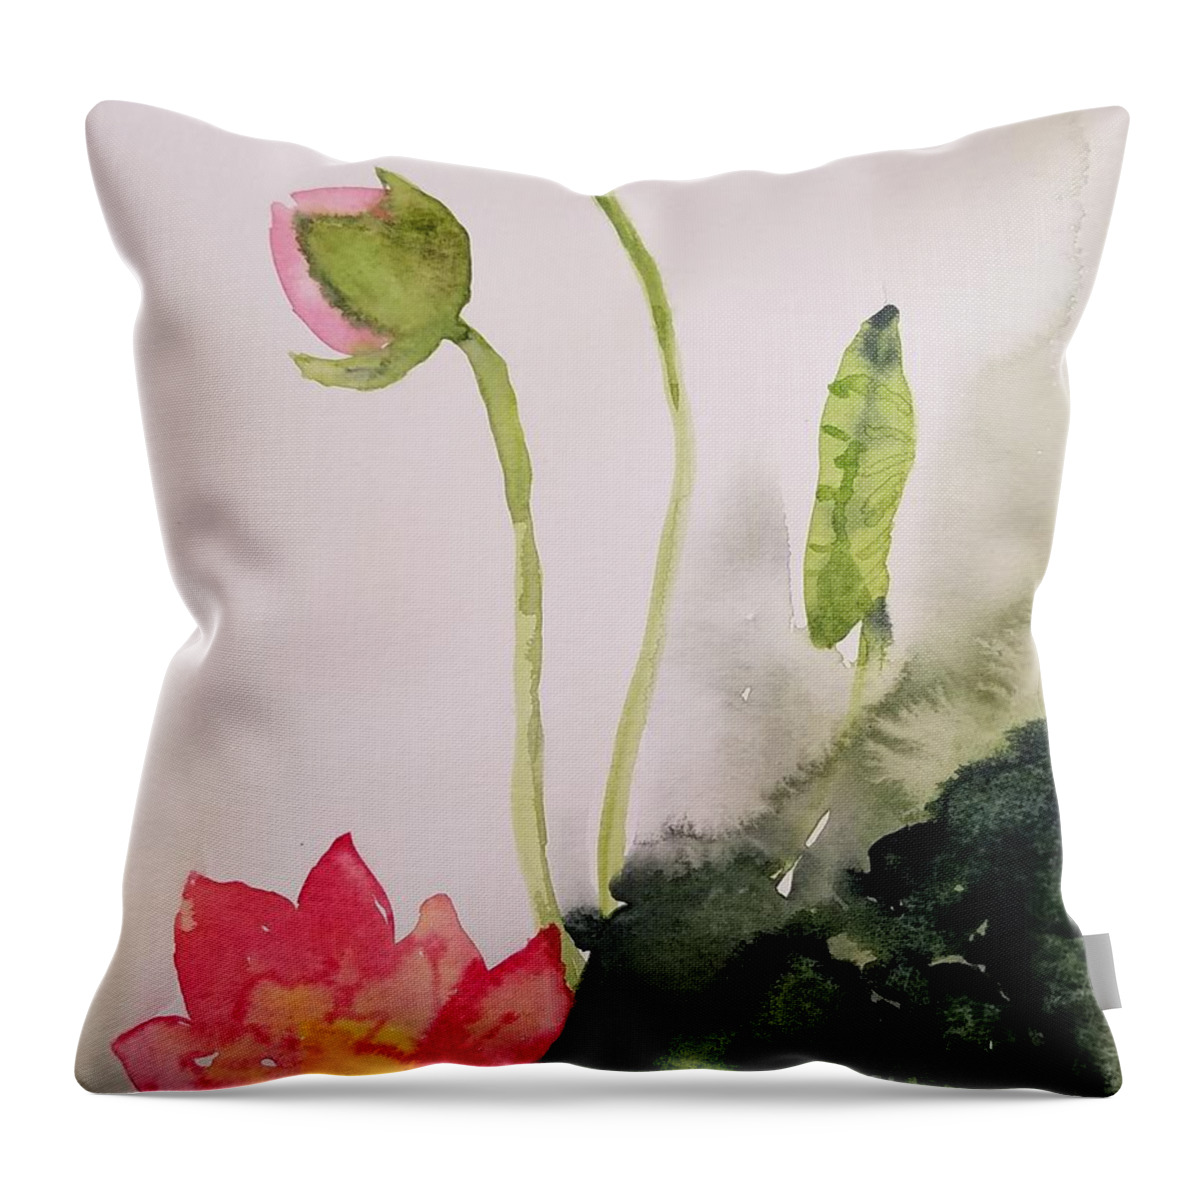 #23 2019 Throw Pillow featuring the painting #23 2019 #23 by Han in Huang wong